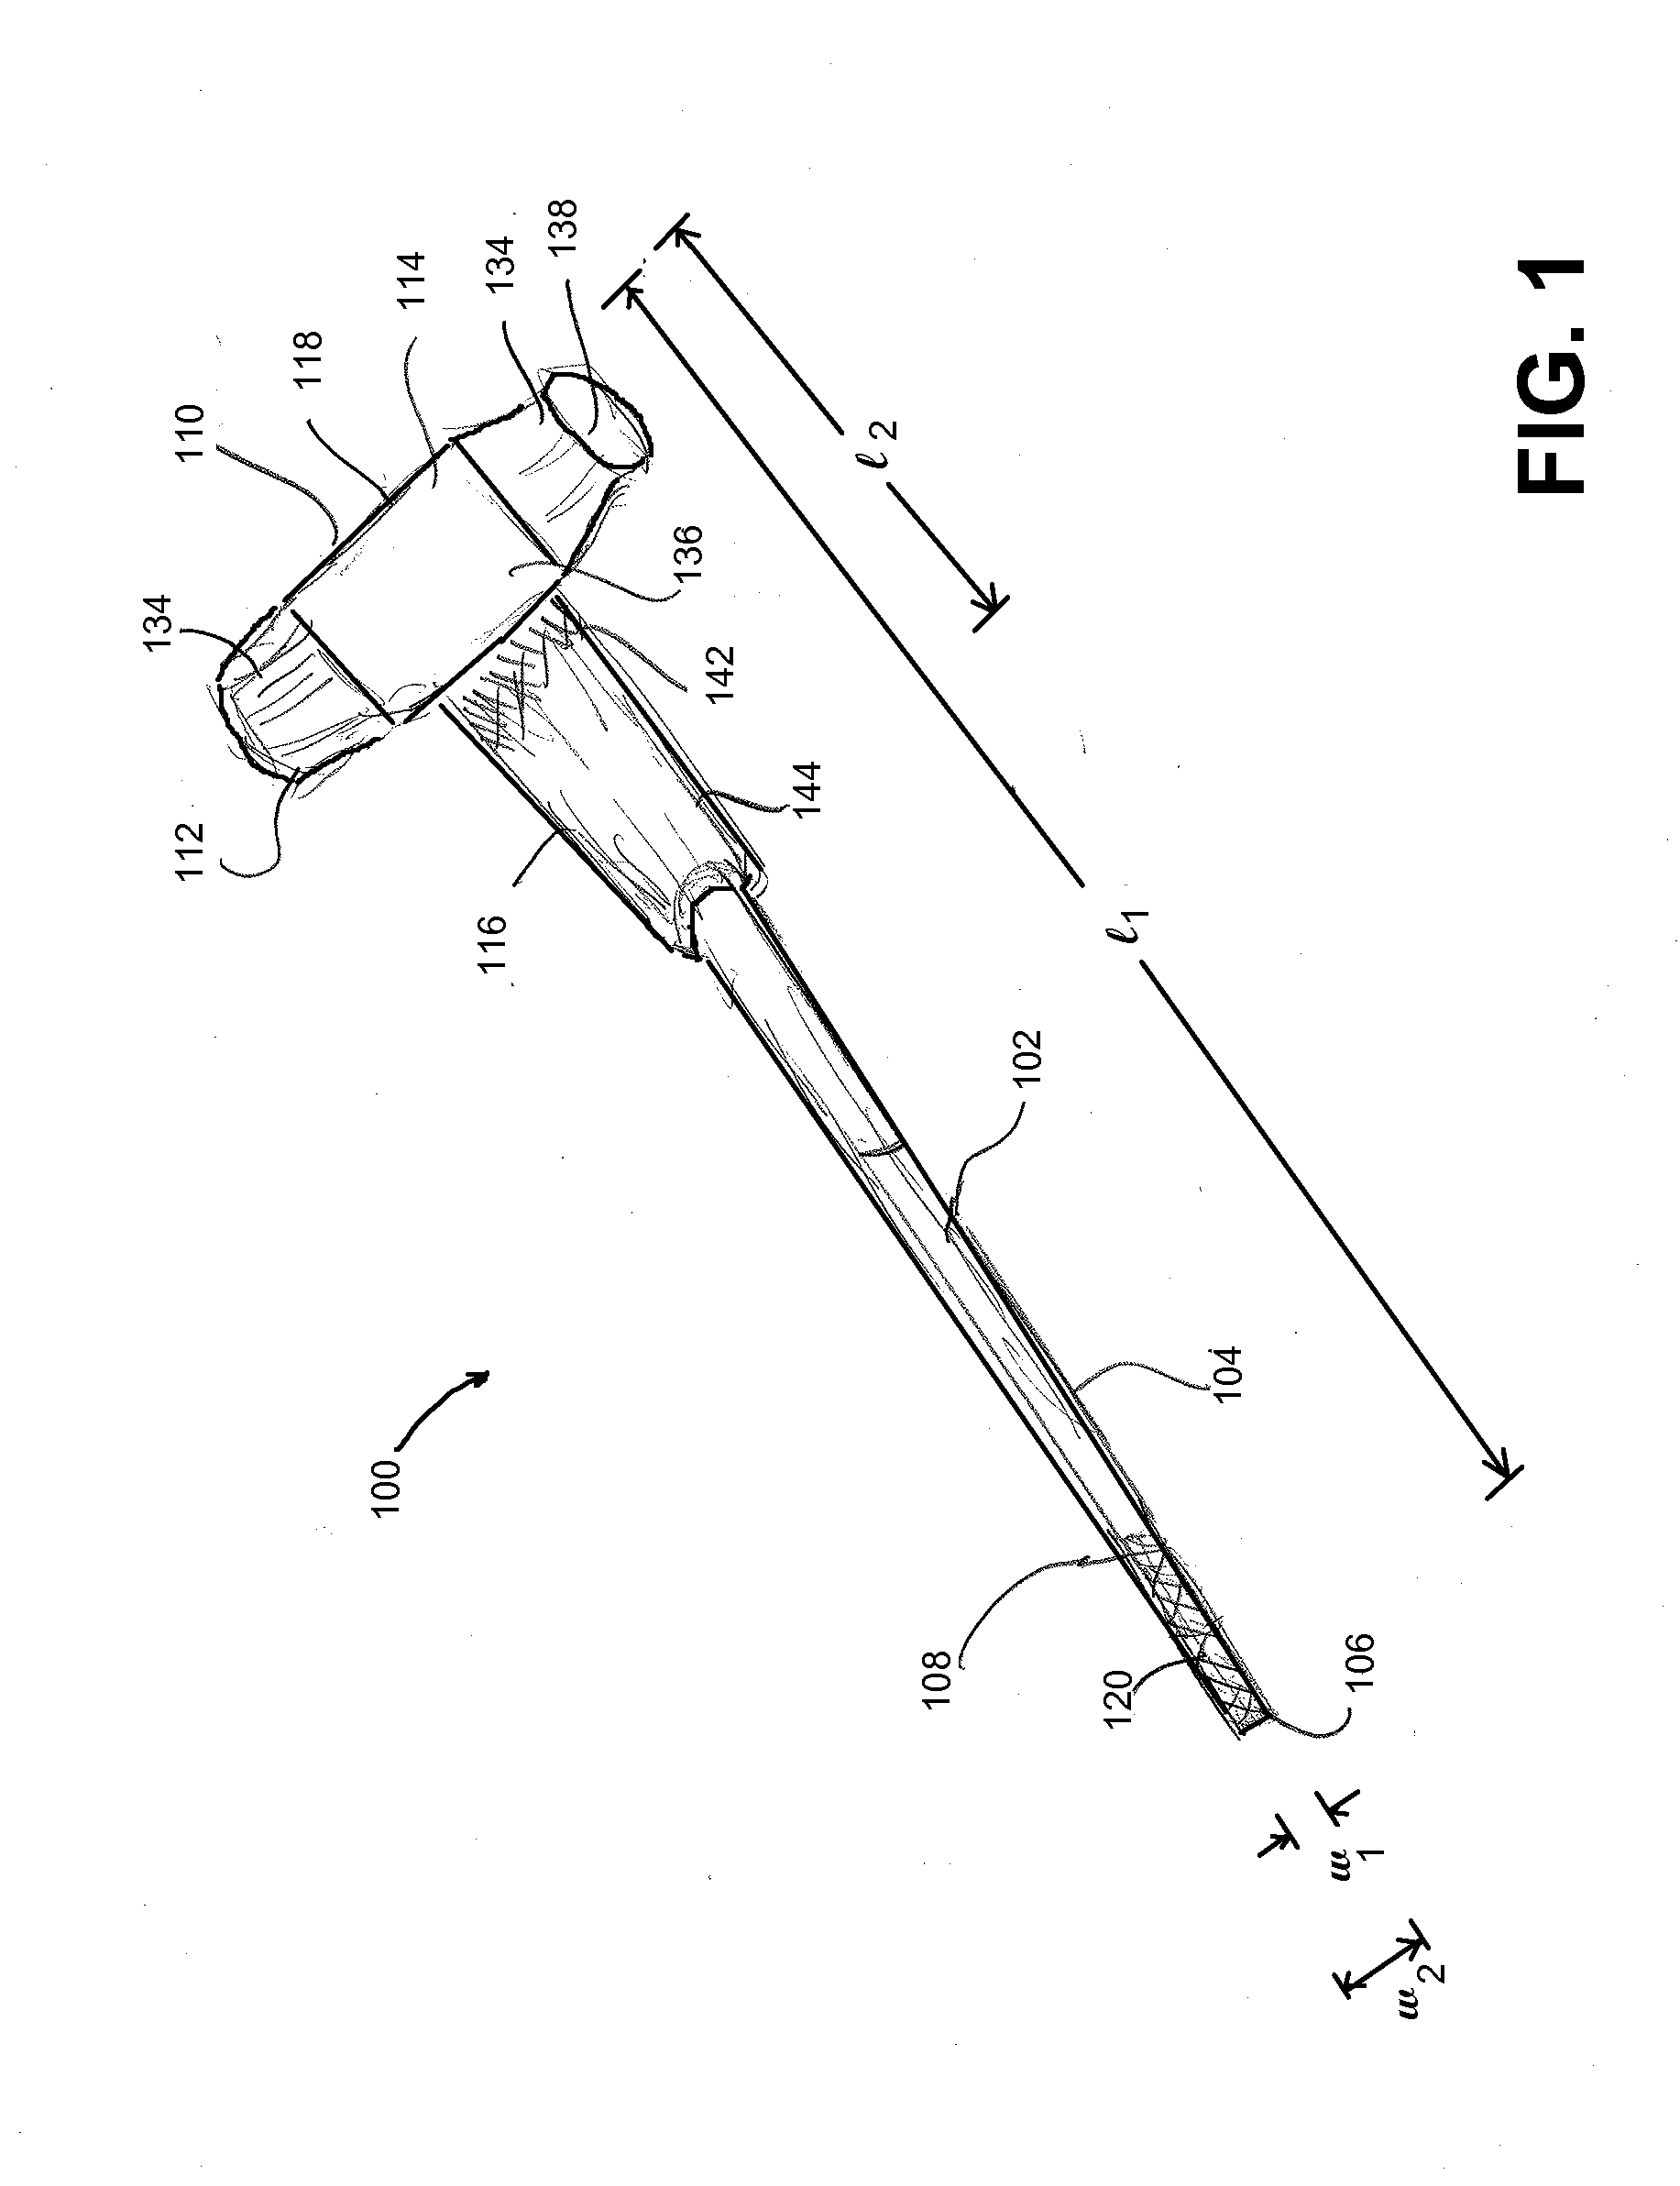 Variable Weight Hammer Useful as Exercise Apparatus